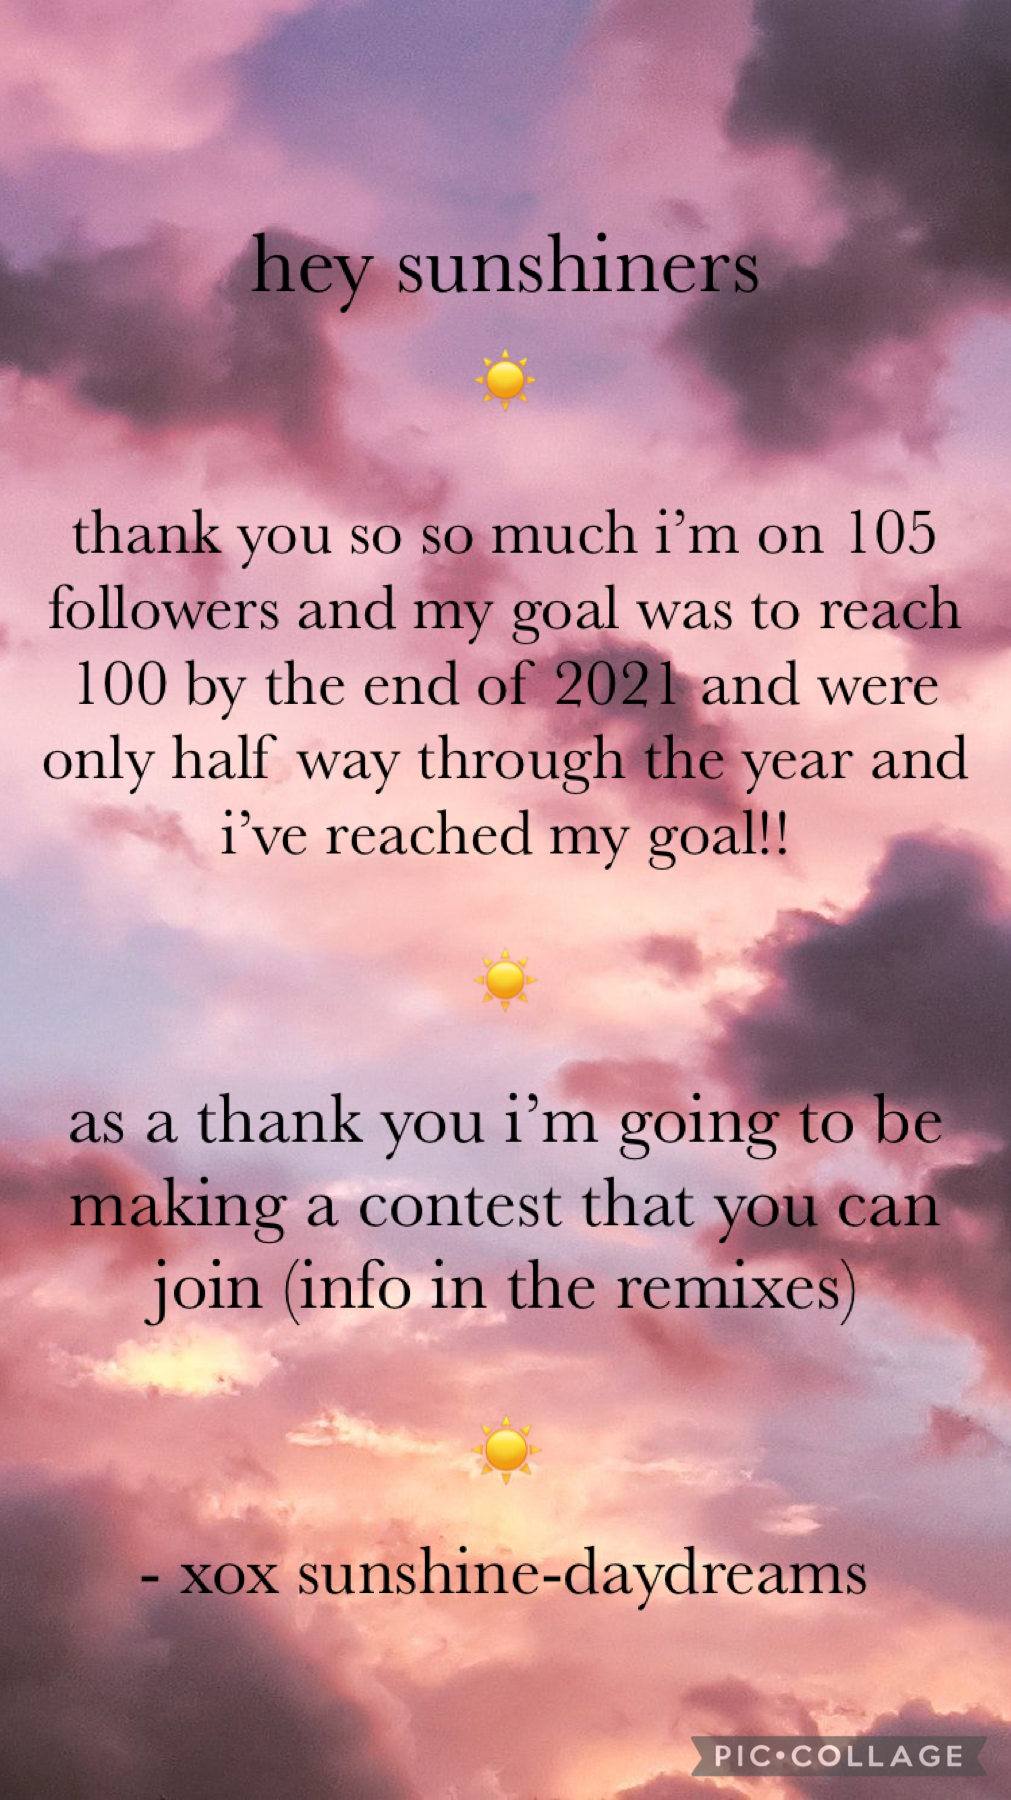 ☀️tap☀️
i cant express how thankful i am for 100 followers, months before i wanted it, thank you for all the support
please join this contest, it would mean a lot thank you 
- xox sunshine-daydreams 💛